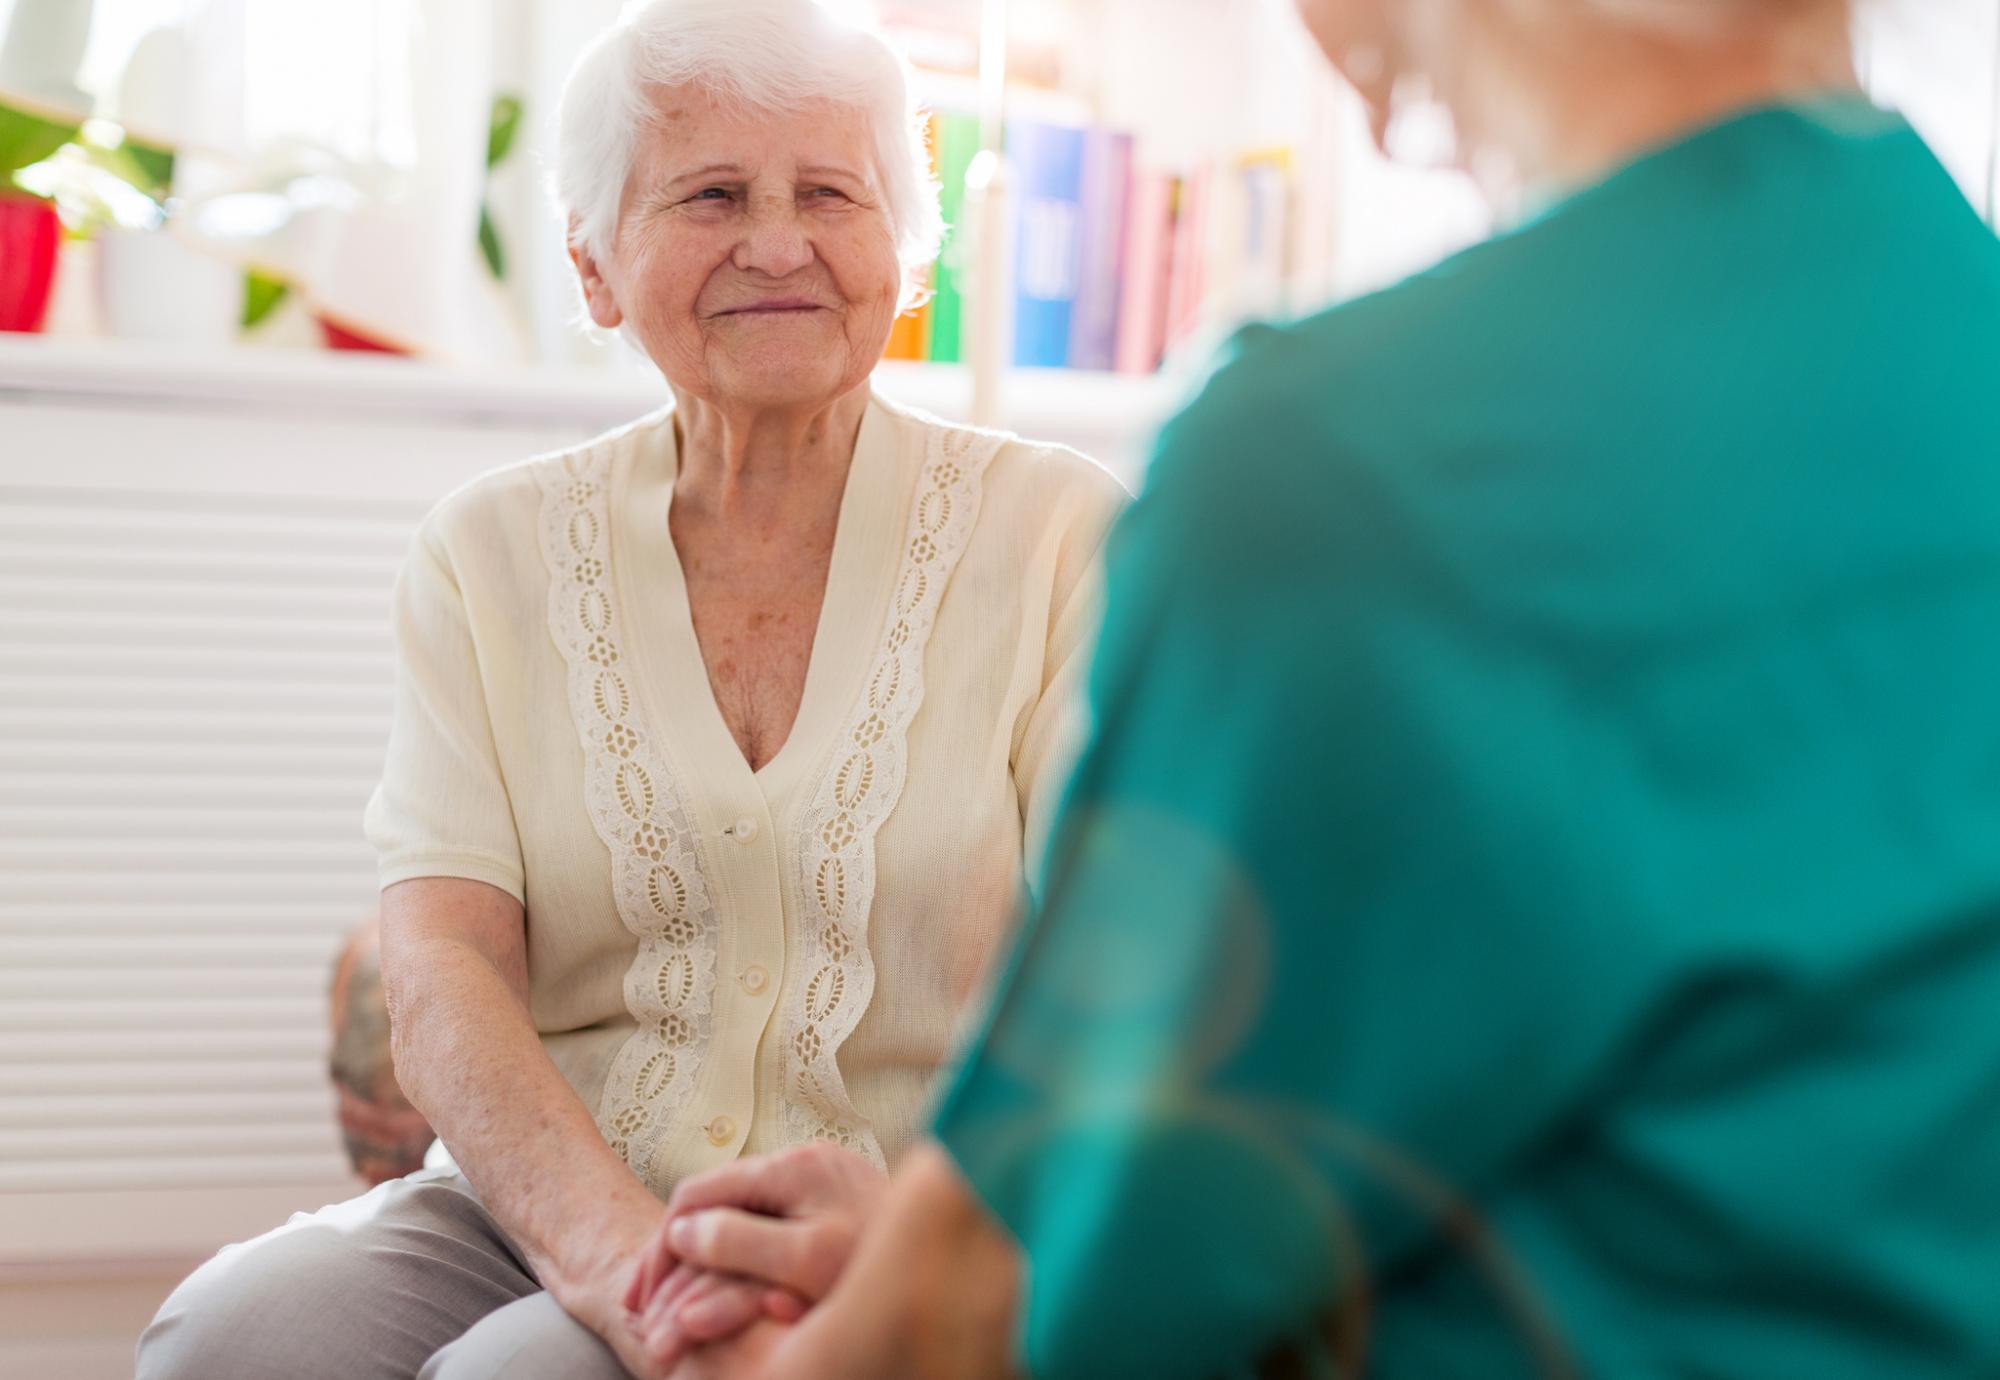 Elderly care home resident in conversation with a nurse